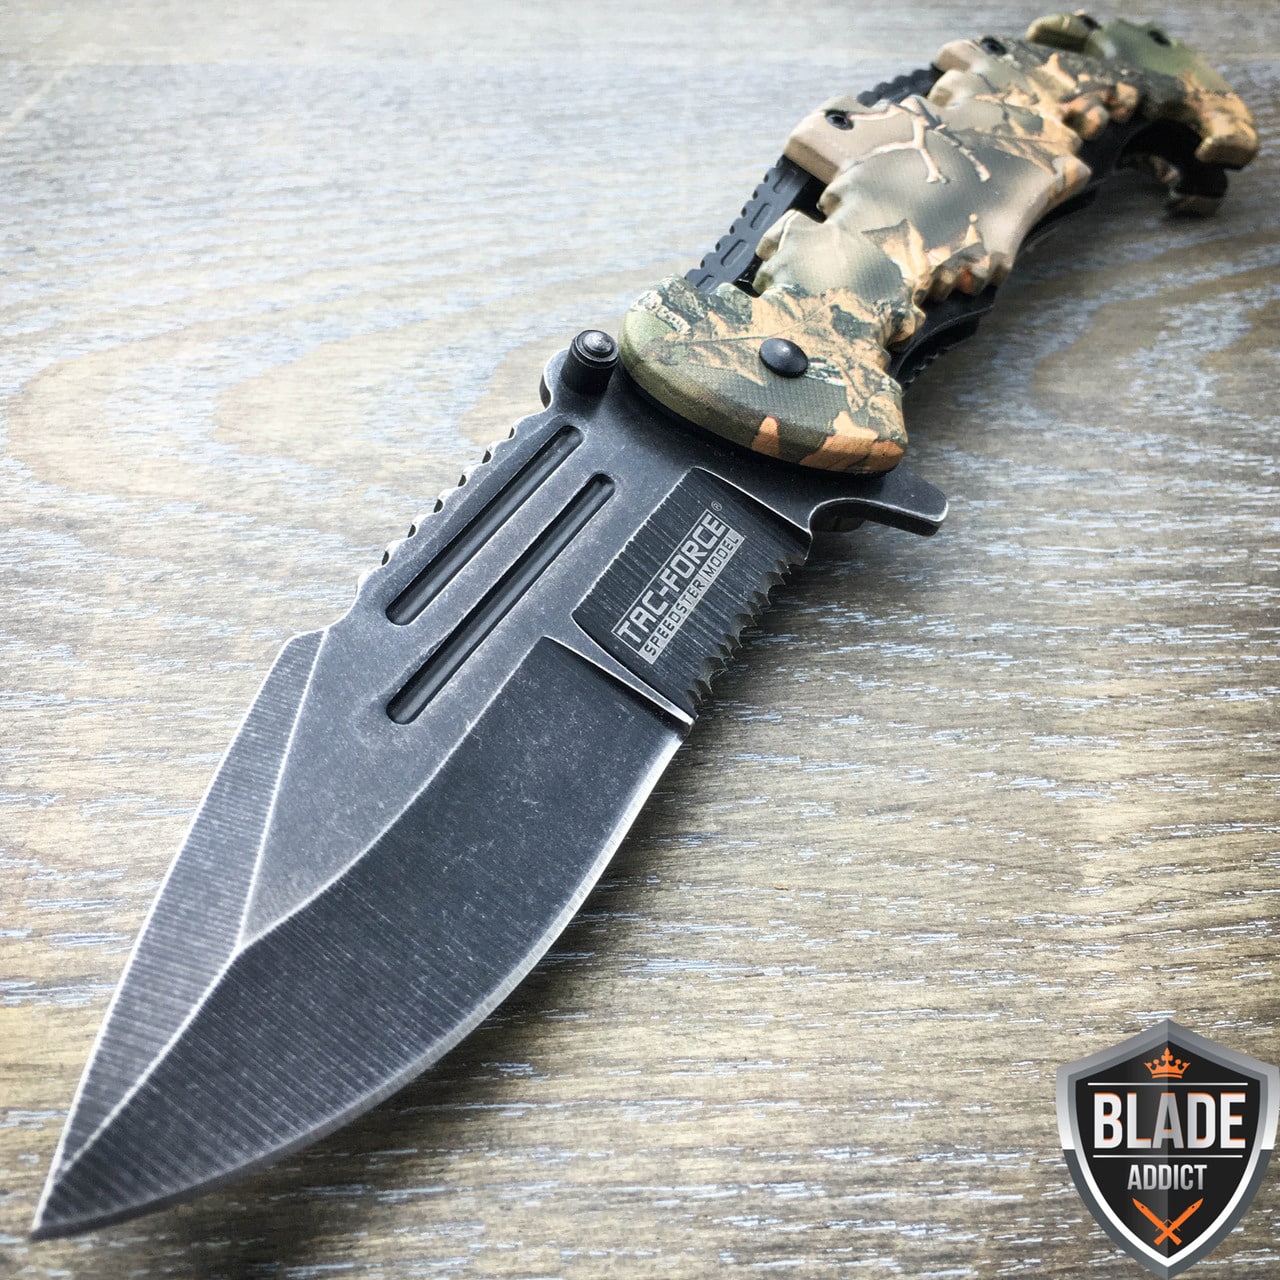 8" TAC FORCE Spring Assisted Opening FOREST CAMO Tactical Rescue Pocket Knife